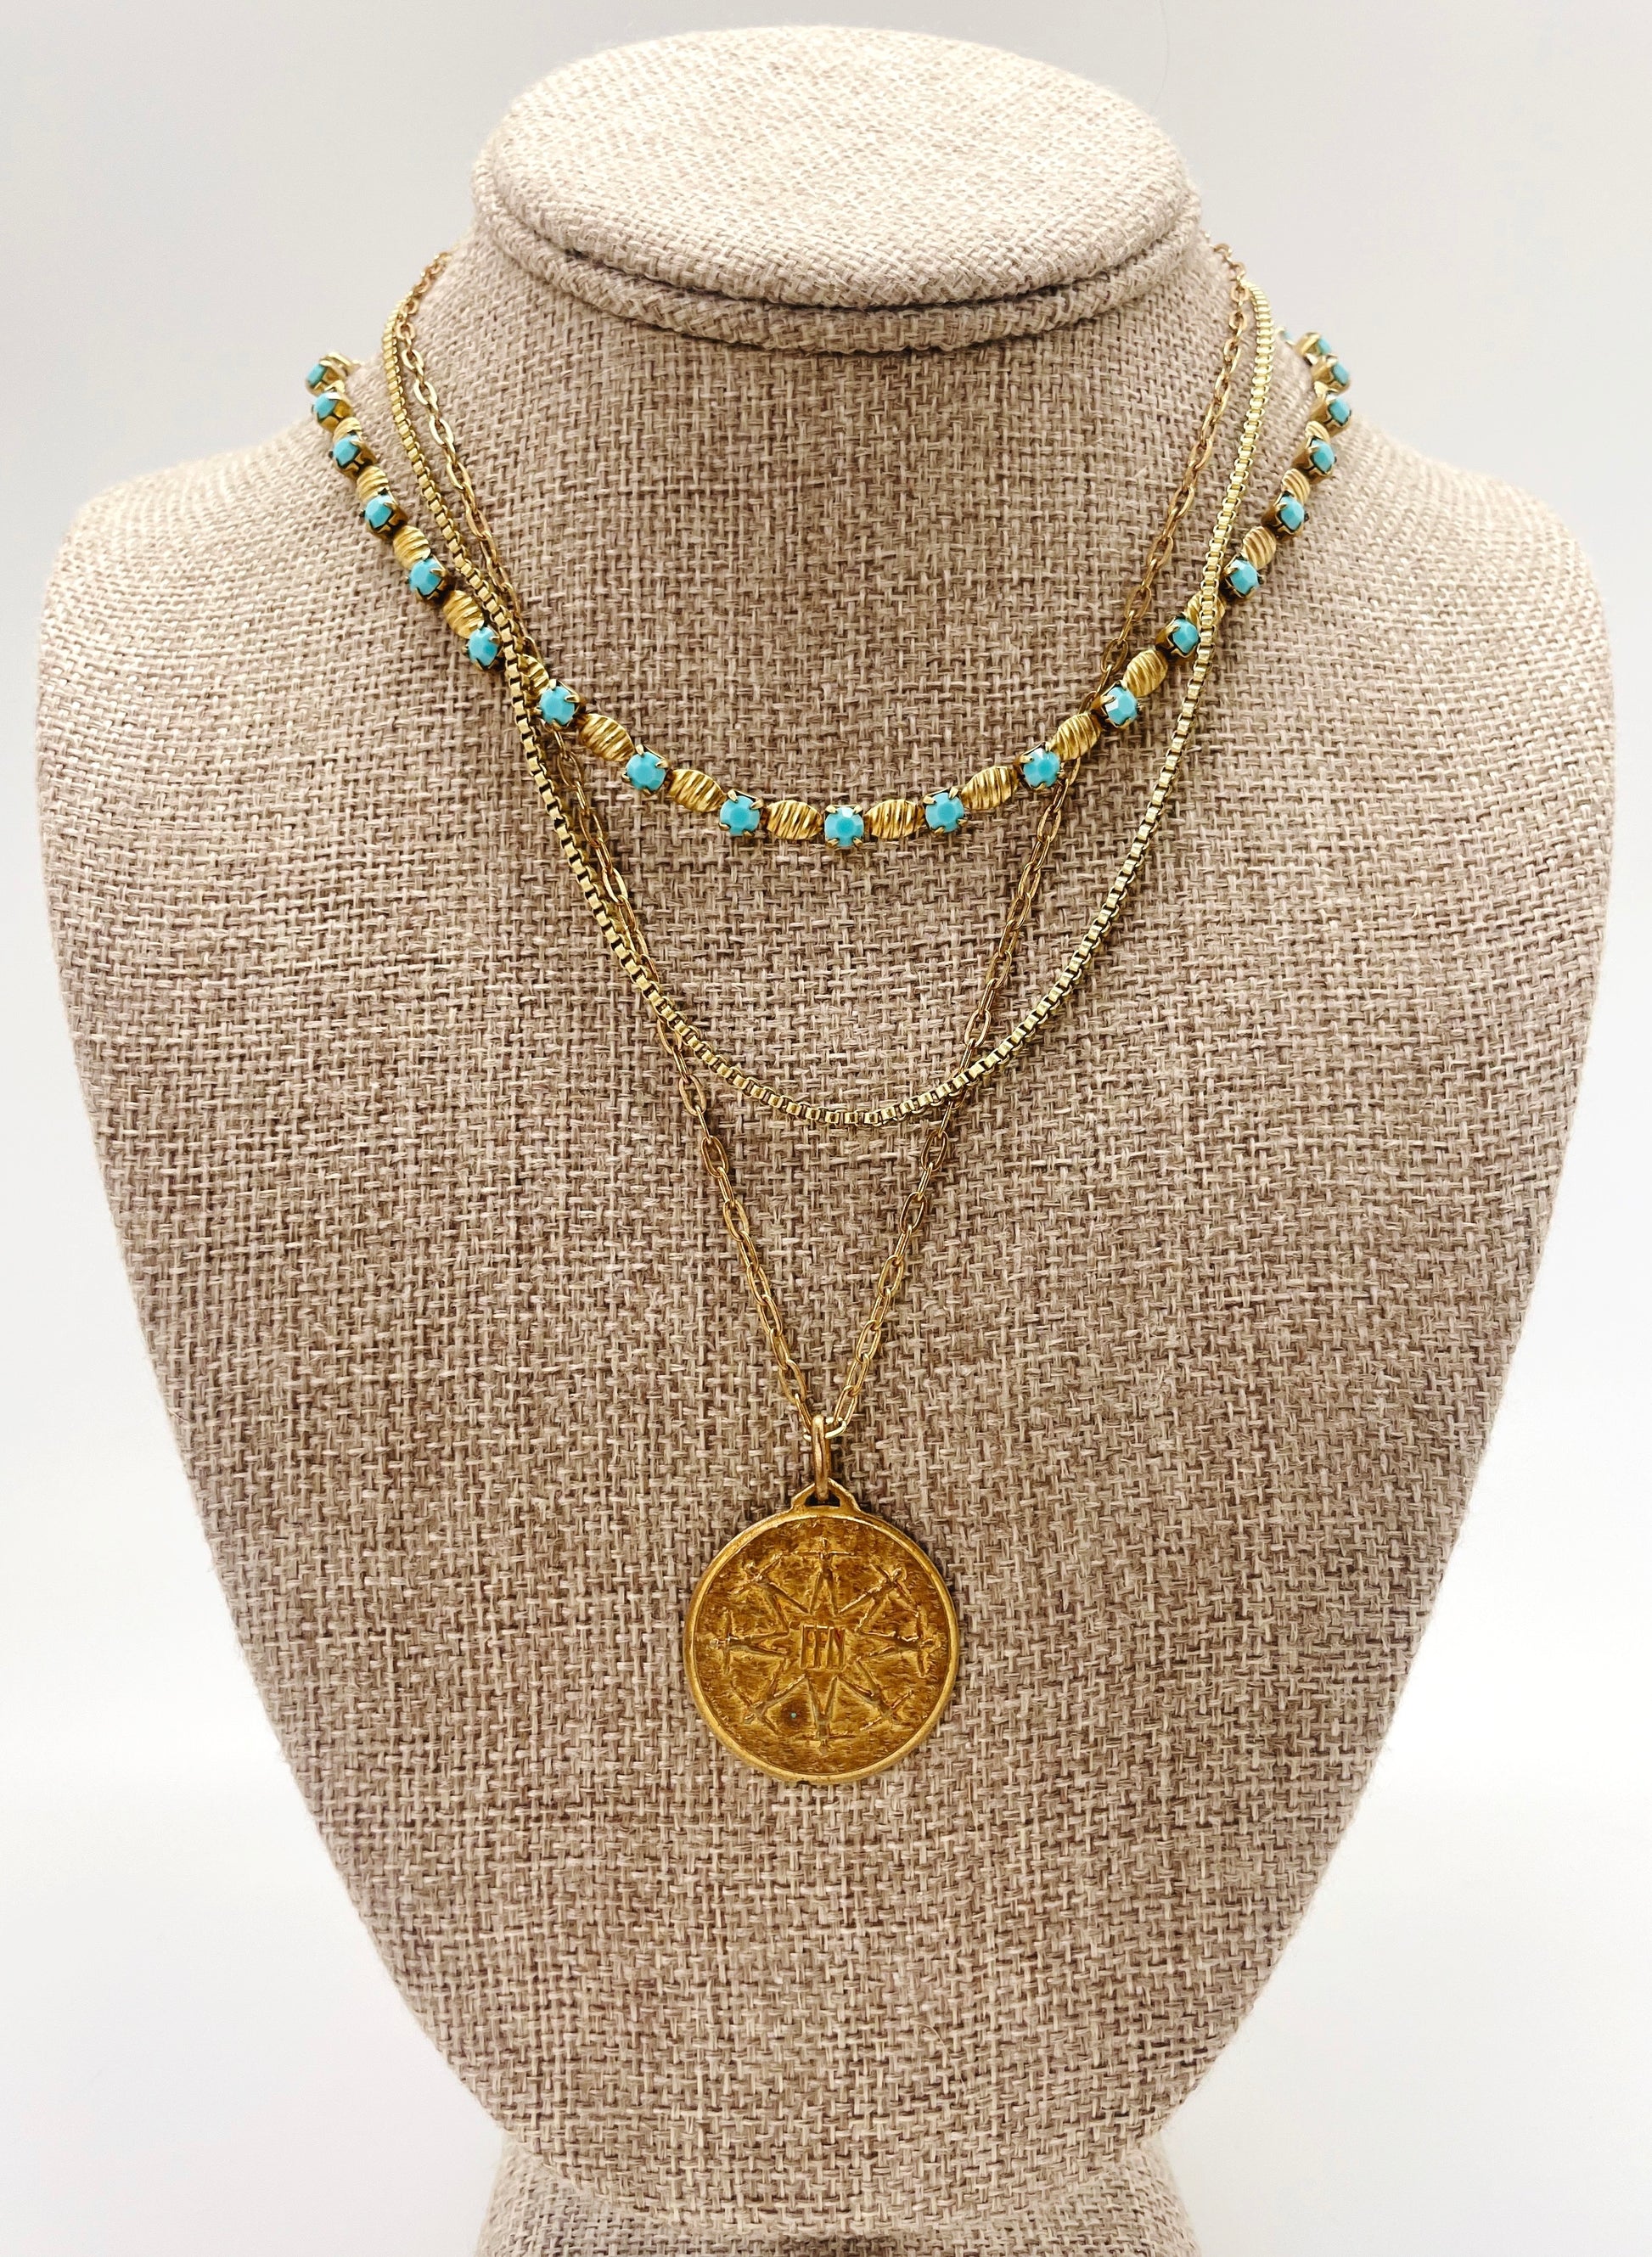 We paired our Baby Blue Necklace with our Box Chain and a coin necklace.